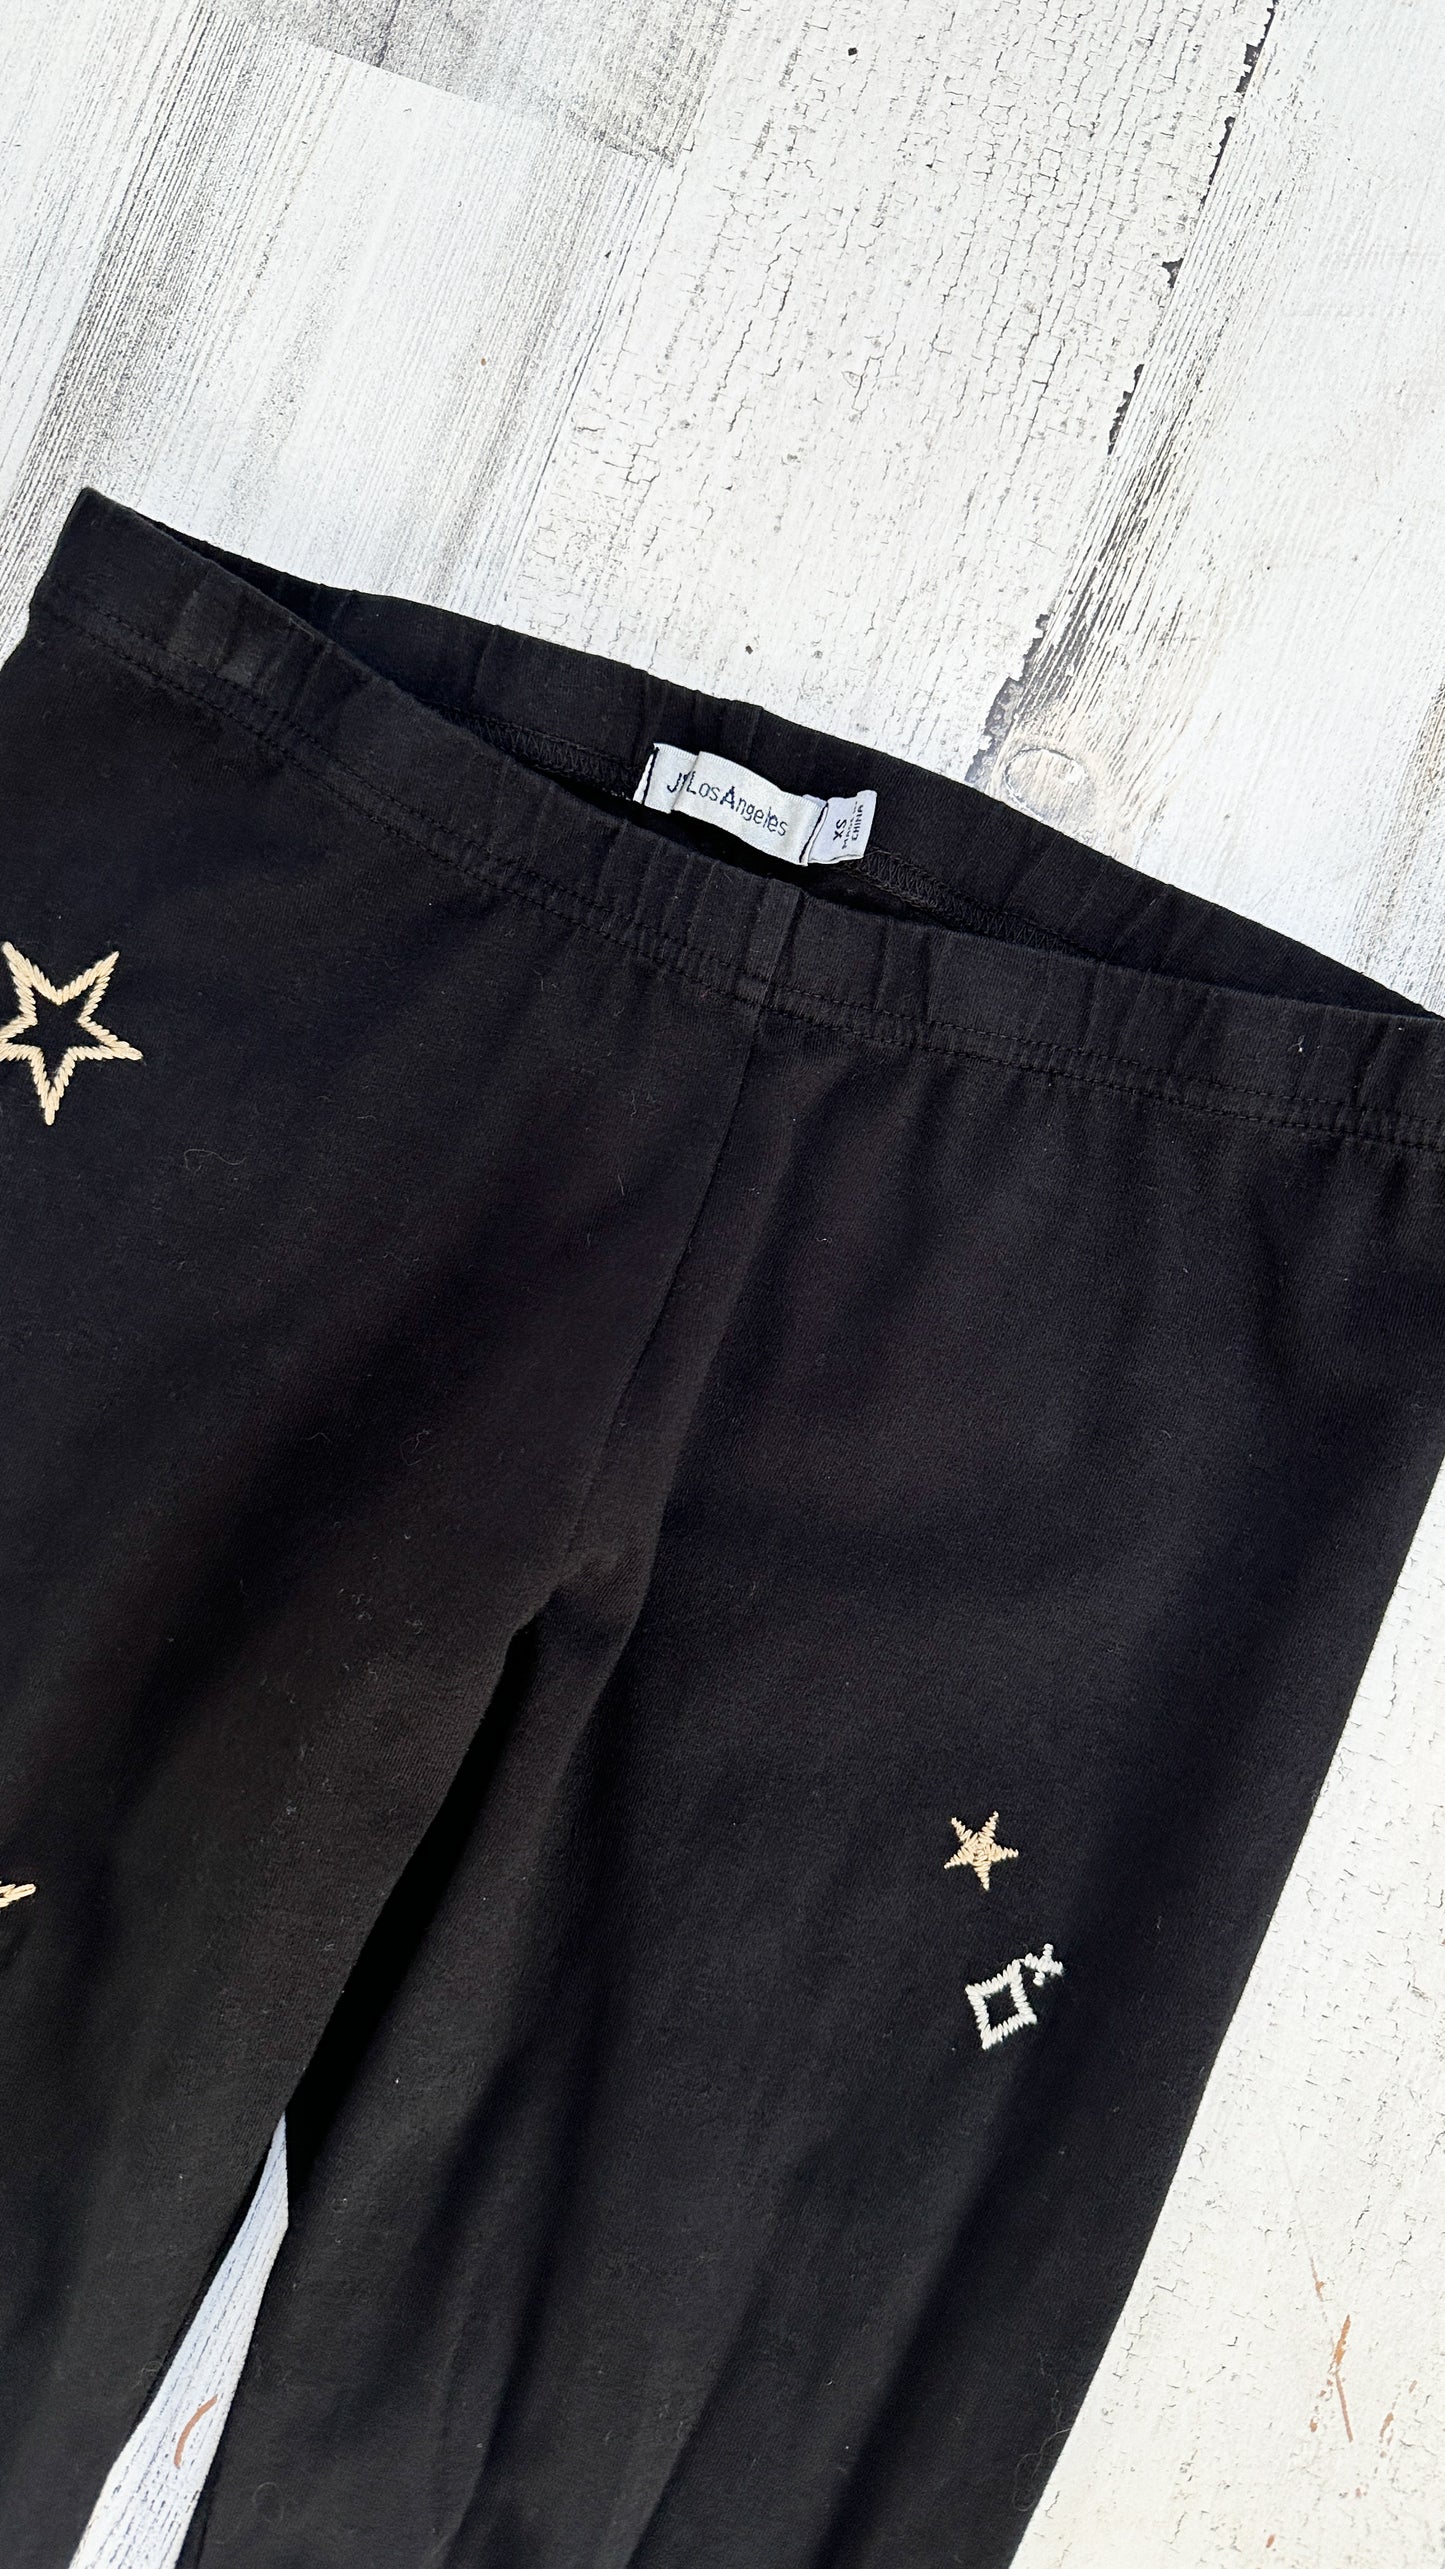 Johnny Was Black Embroidered Leggings (XS)